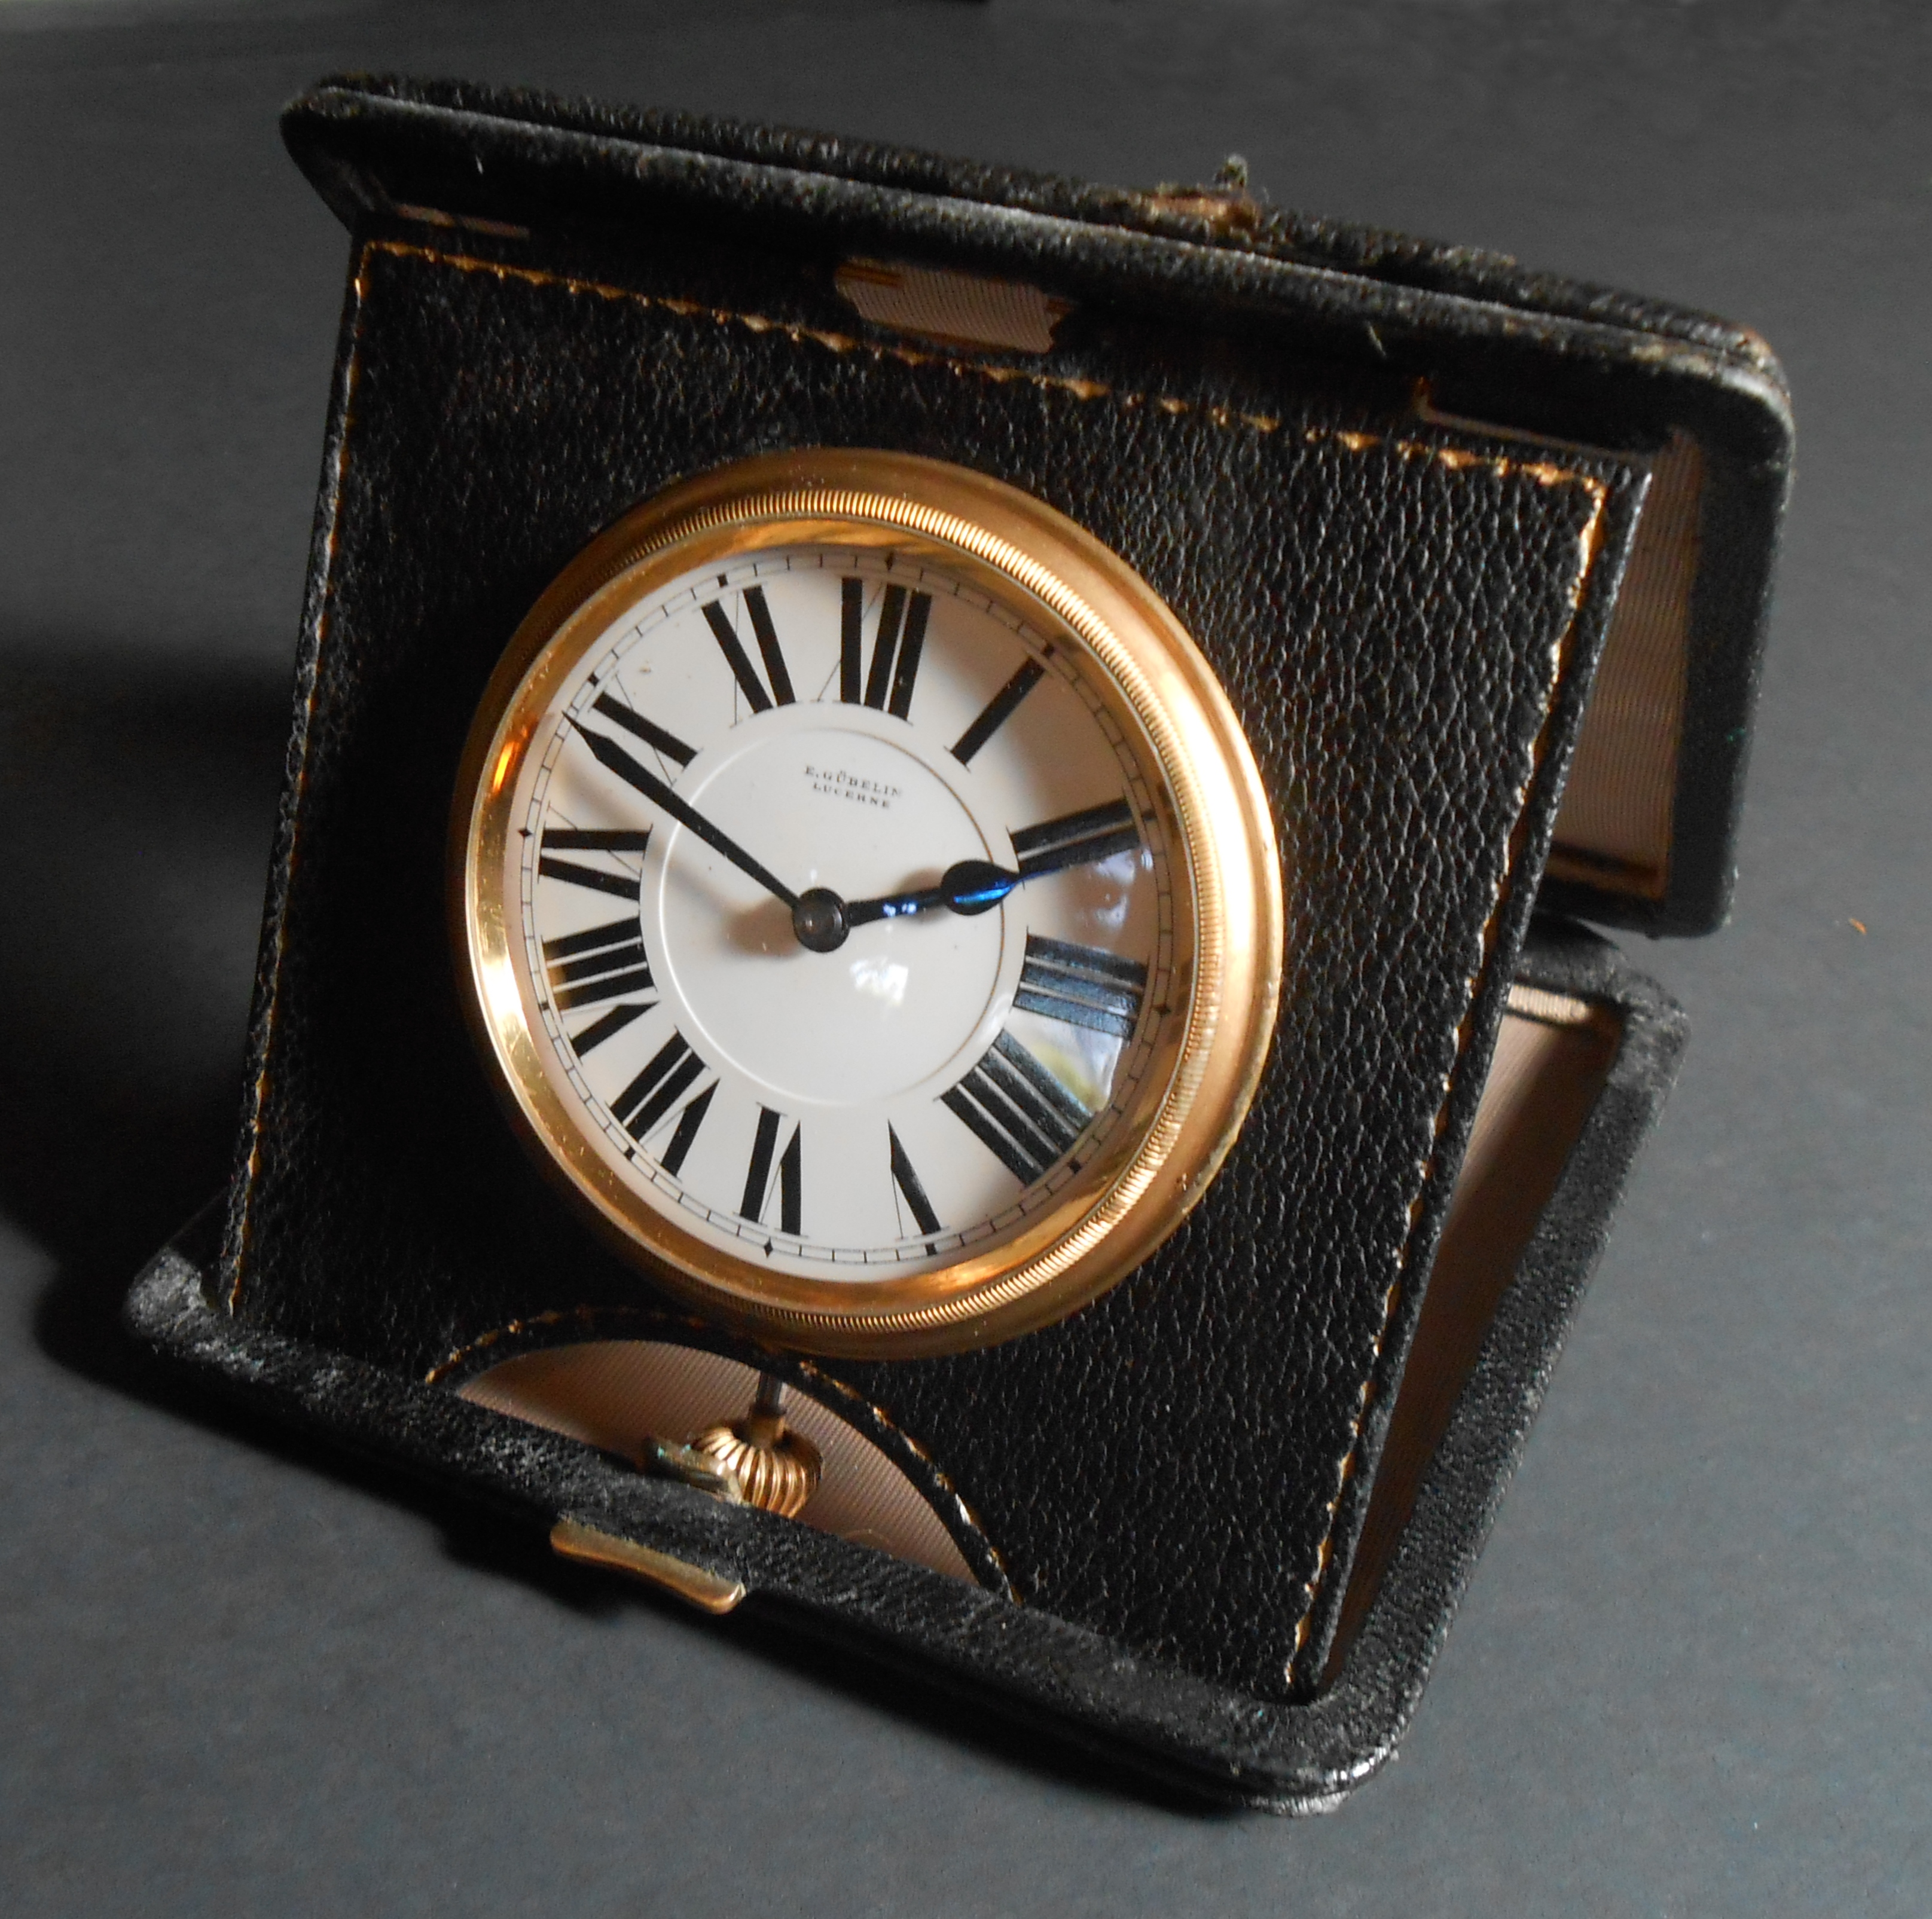 Octava movement High end travel by upon | a Gubelin Once 1920 time circa clock